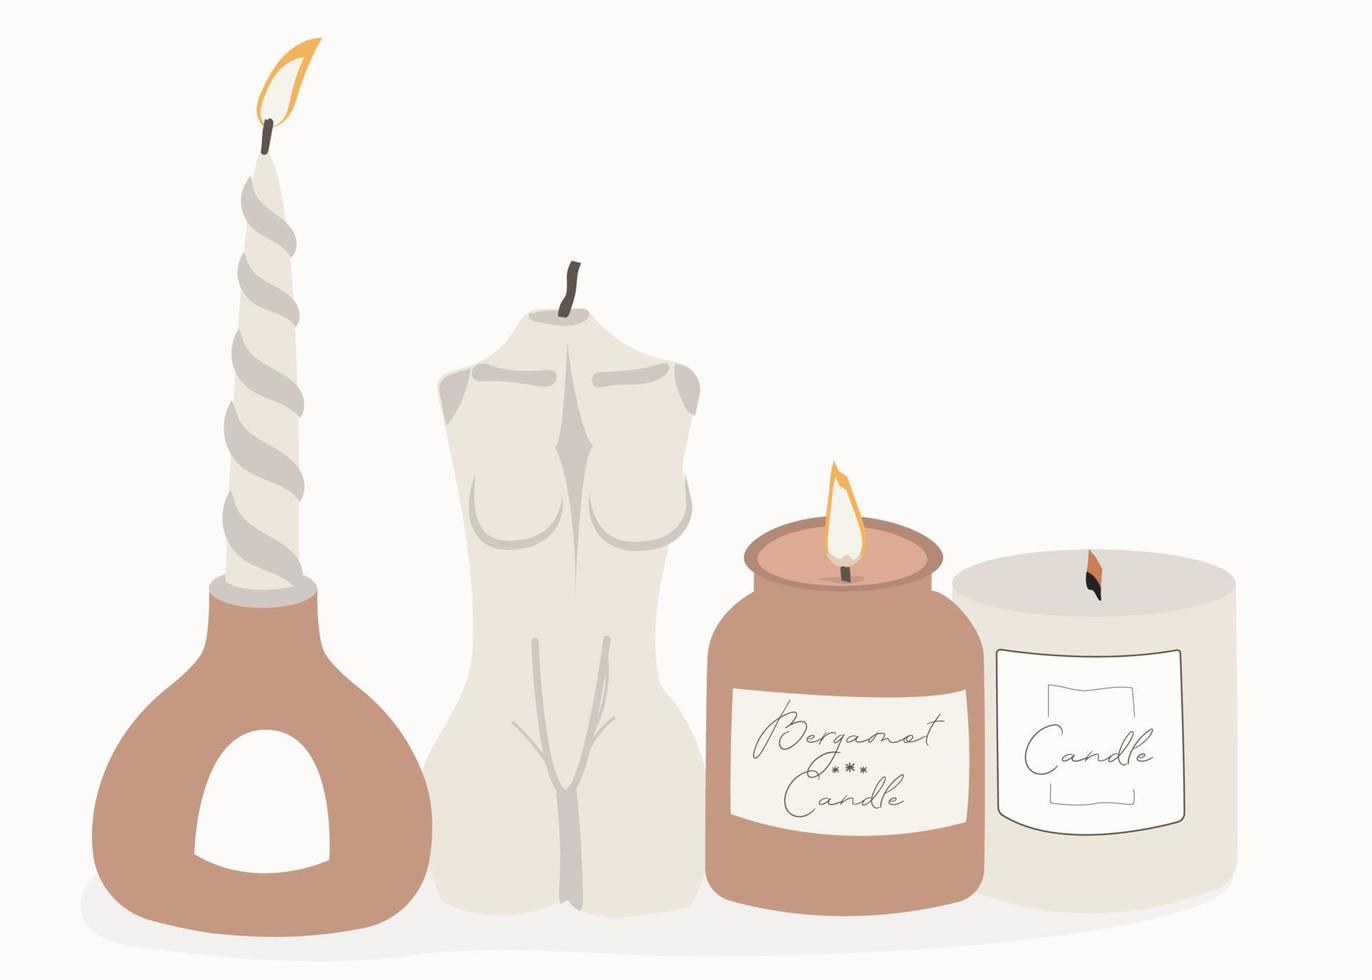 beautiful aesthetic candles, lit, an element of decor and comfort for the home vector